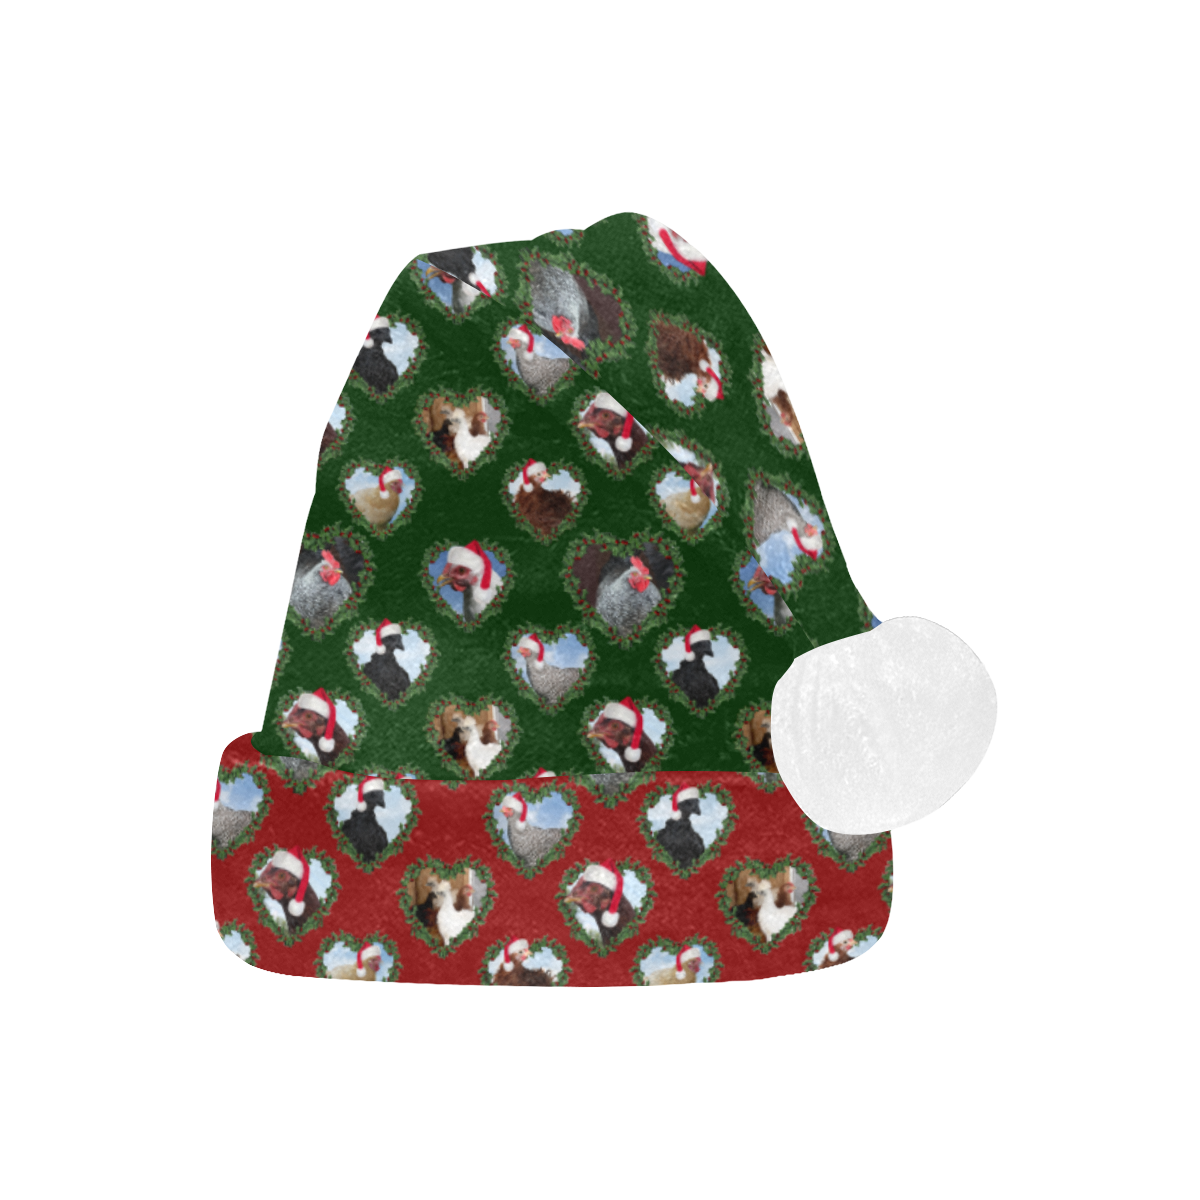 Christmas Chickens in Heart Wreaths Green and Red Santa Hat